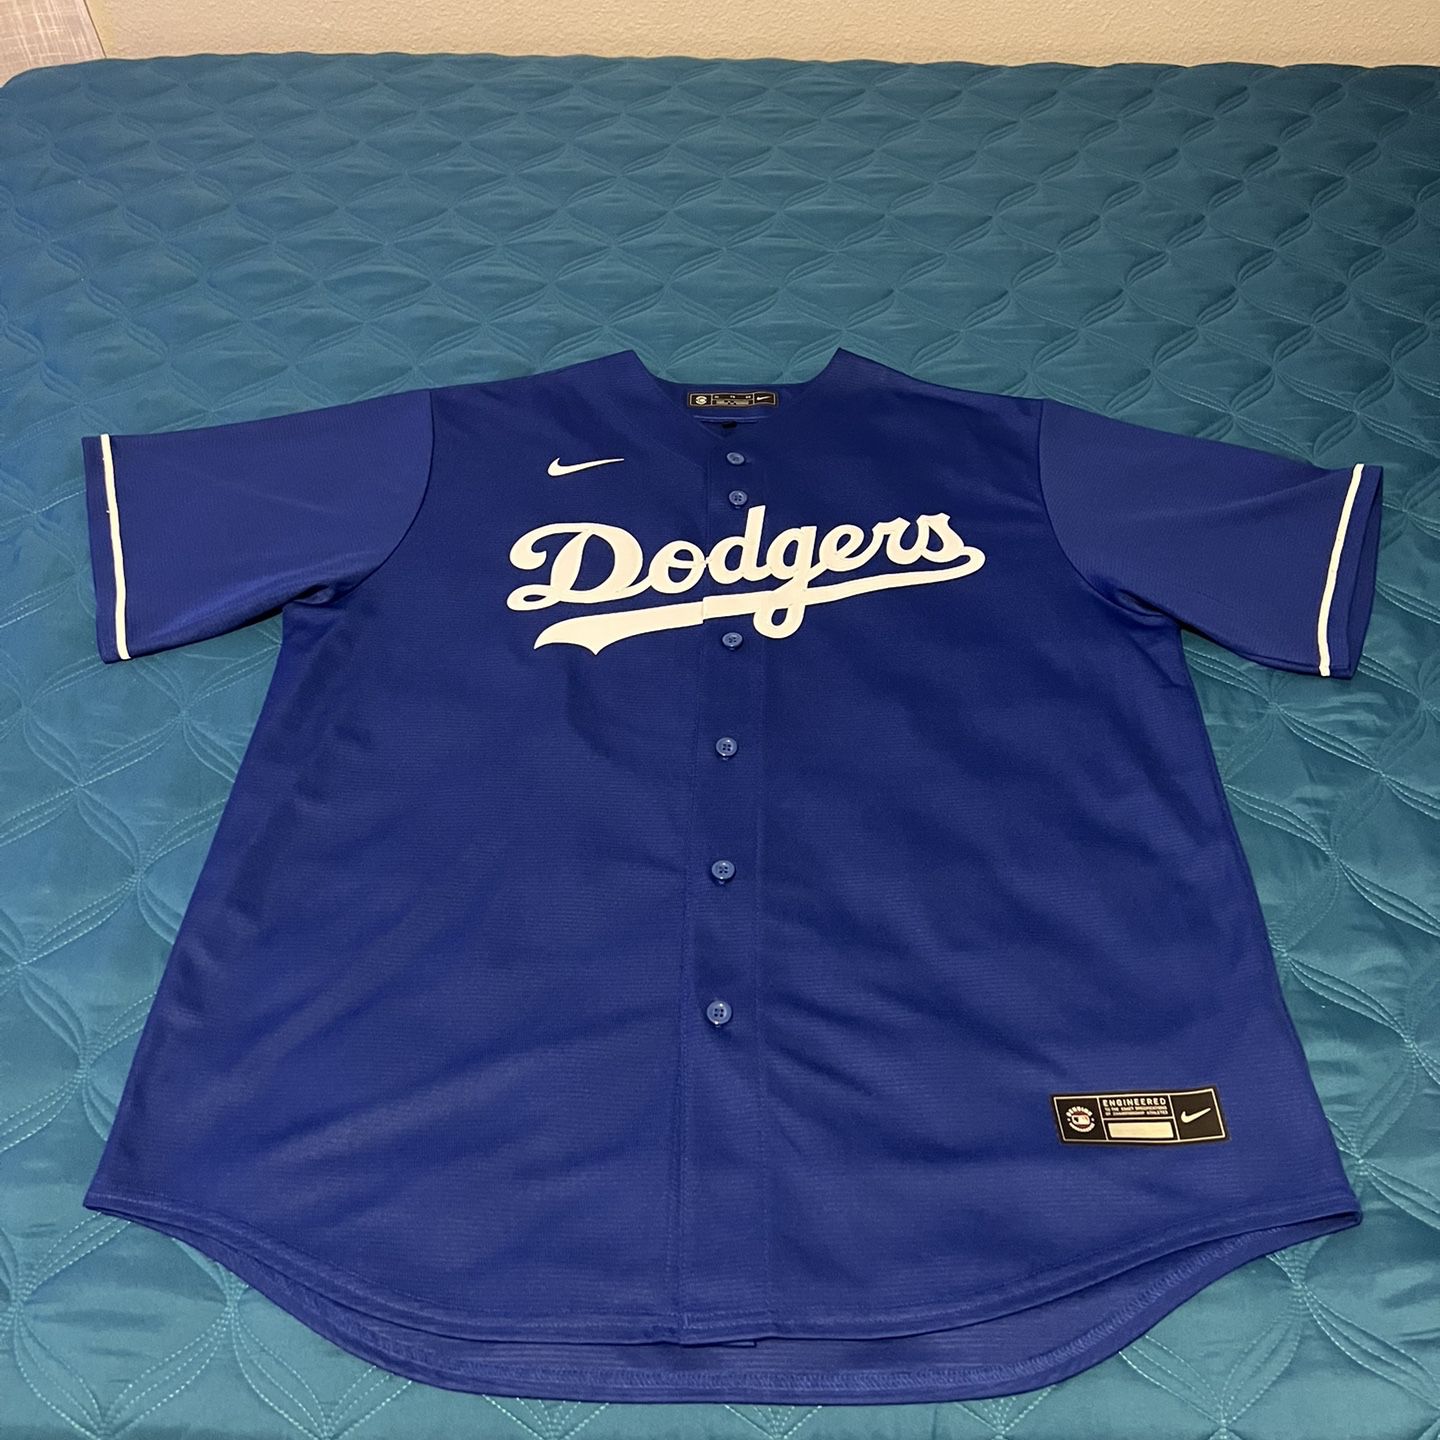 Authentic Mookie Betts jersey for Sale in Riverside, CA - OfferUp